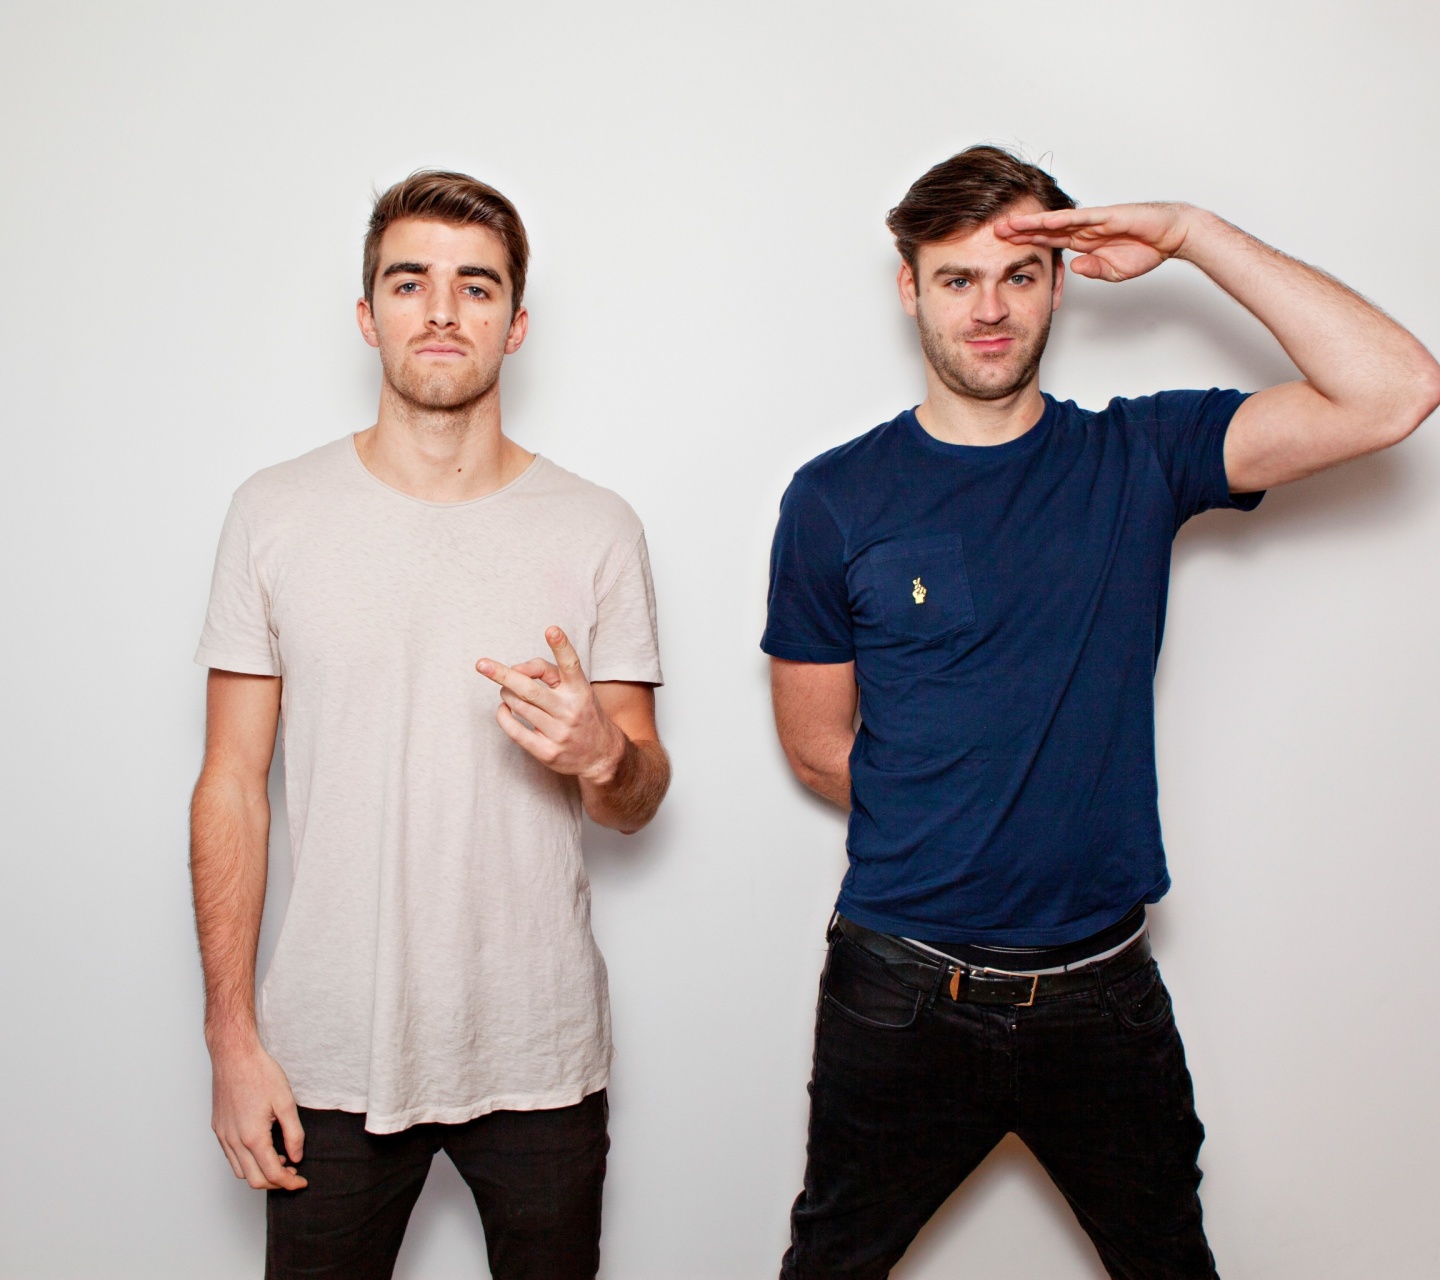 The Chainsmokers with Andrew Taggart and Alex Pall screenshot #1 1440x1280